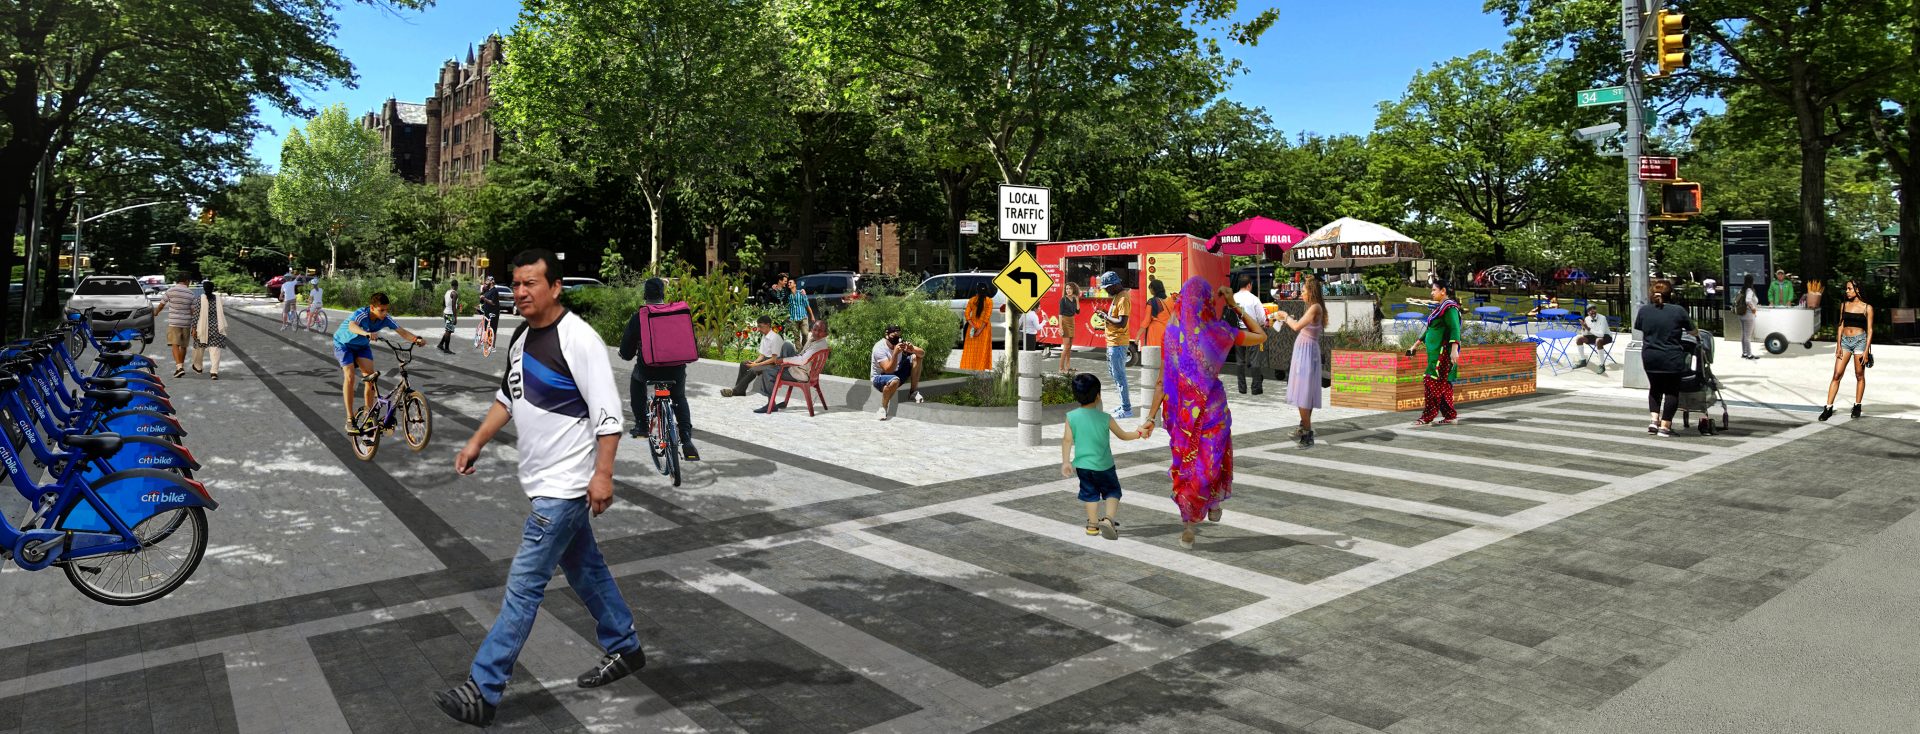 Street Plans + Happy City Build One-Day Public Space Intervention in West Palm Beach, FL